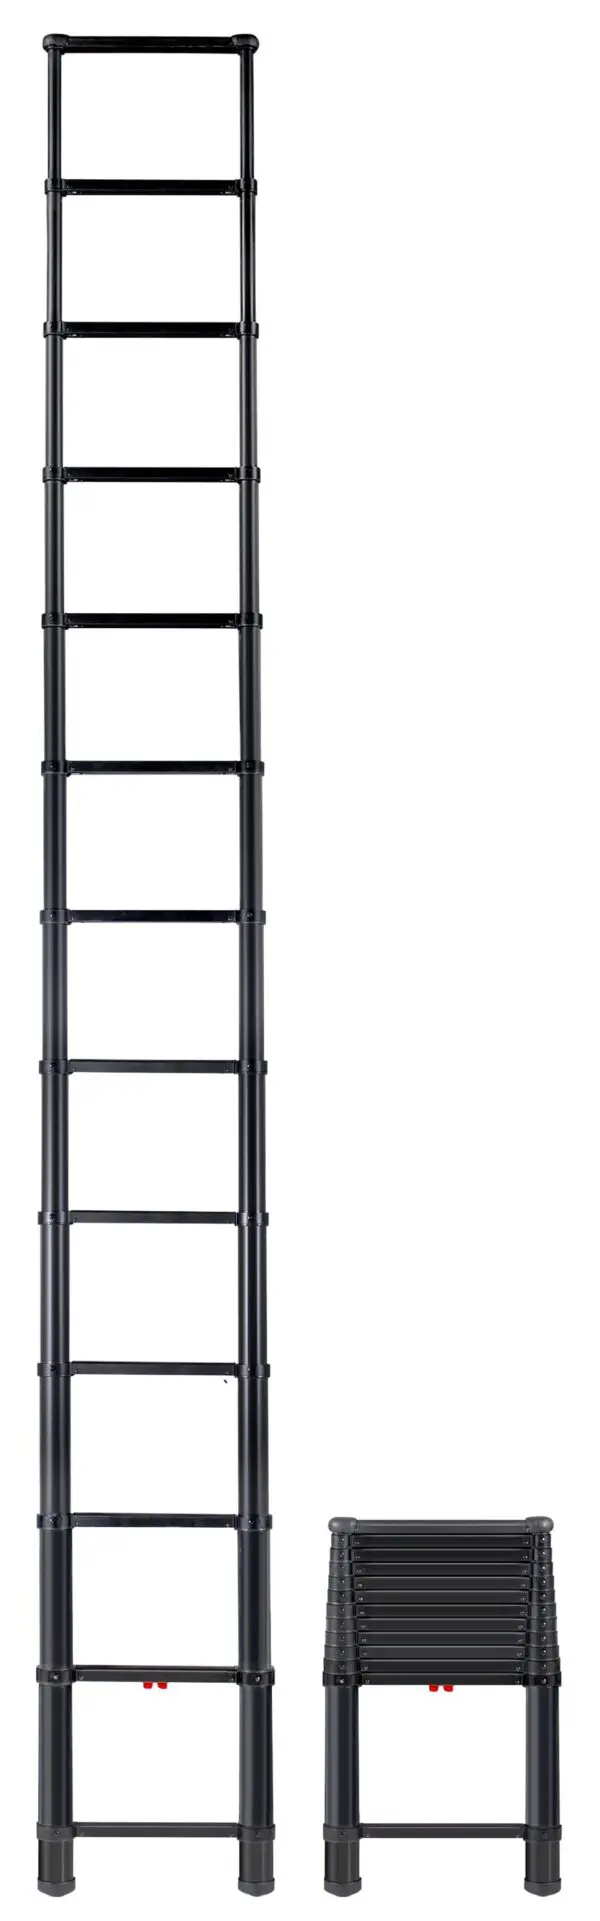 A ladder is shown with no one in it.